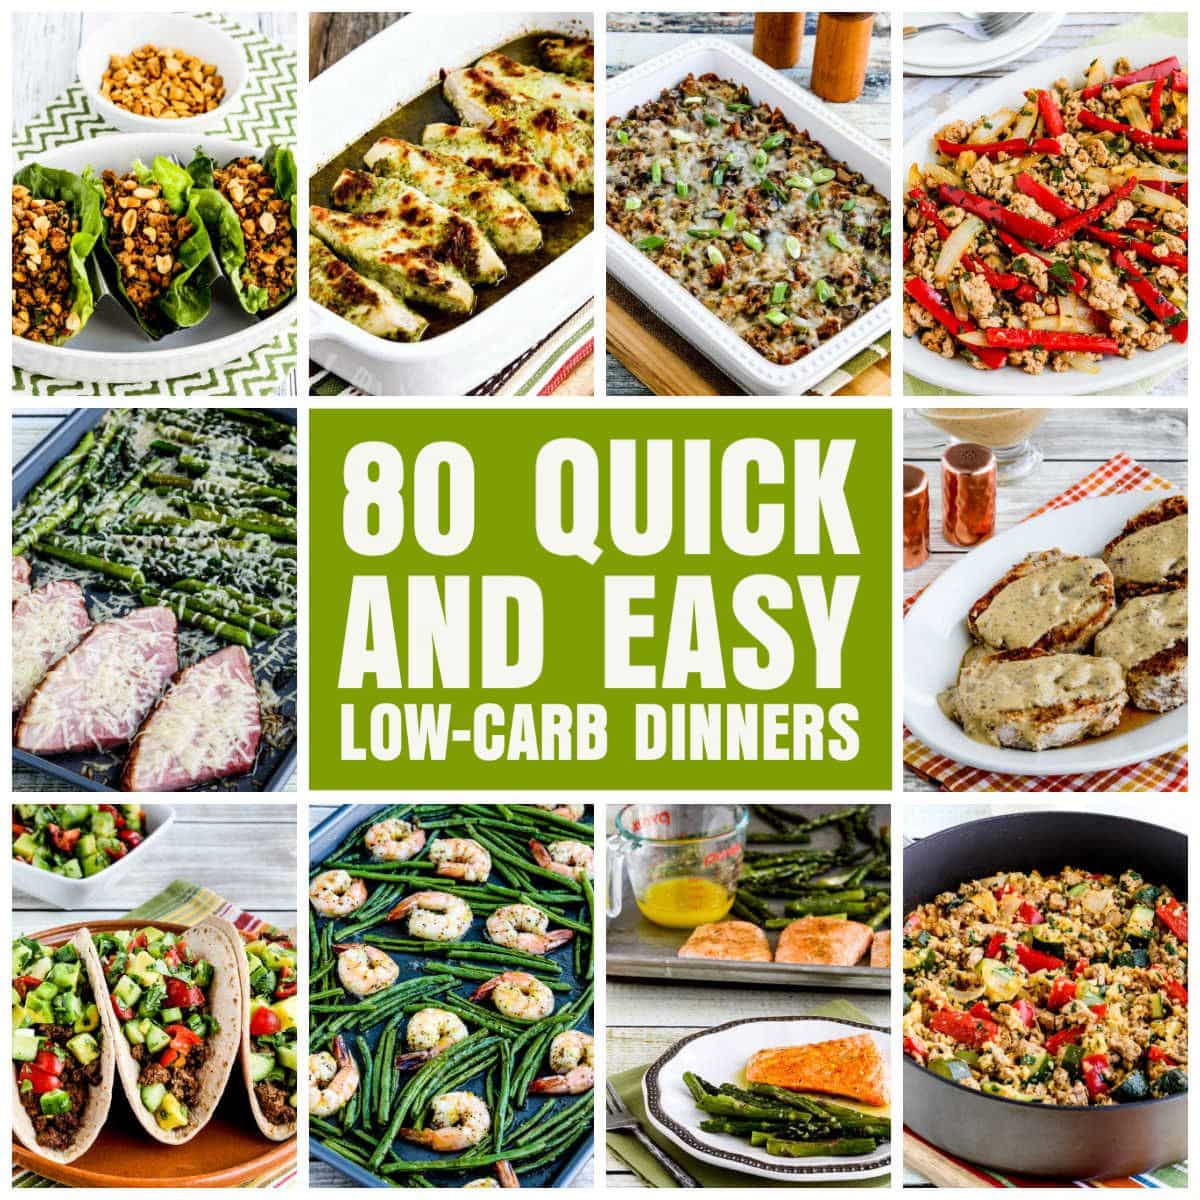 80 Quick and Easy Low-Carb Dinners